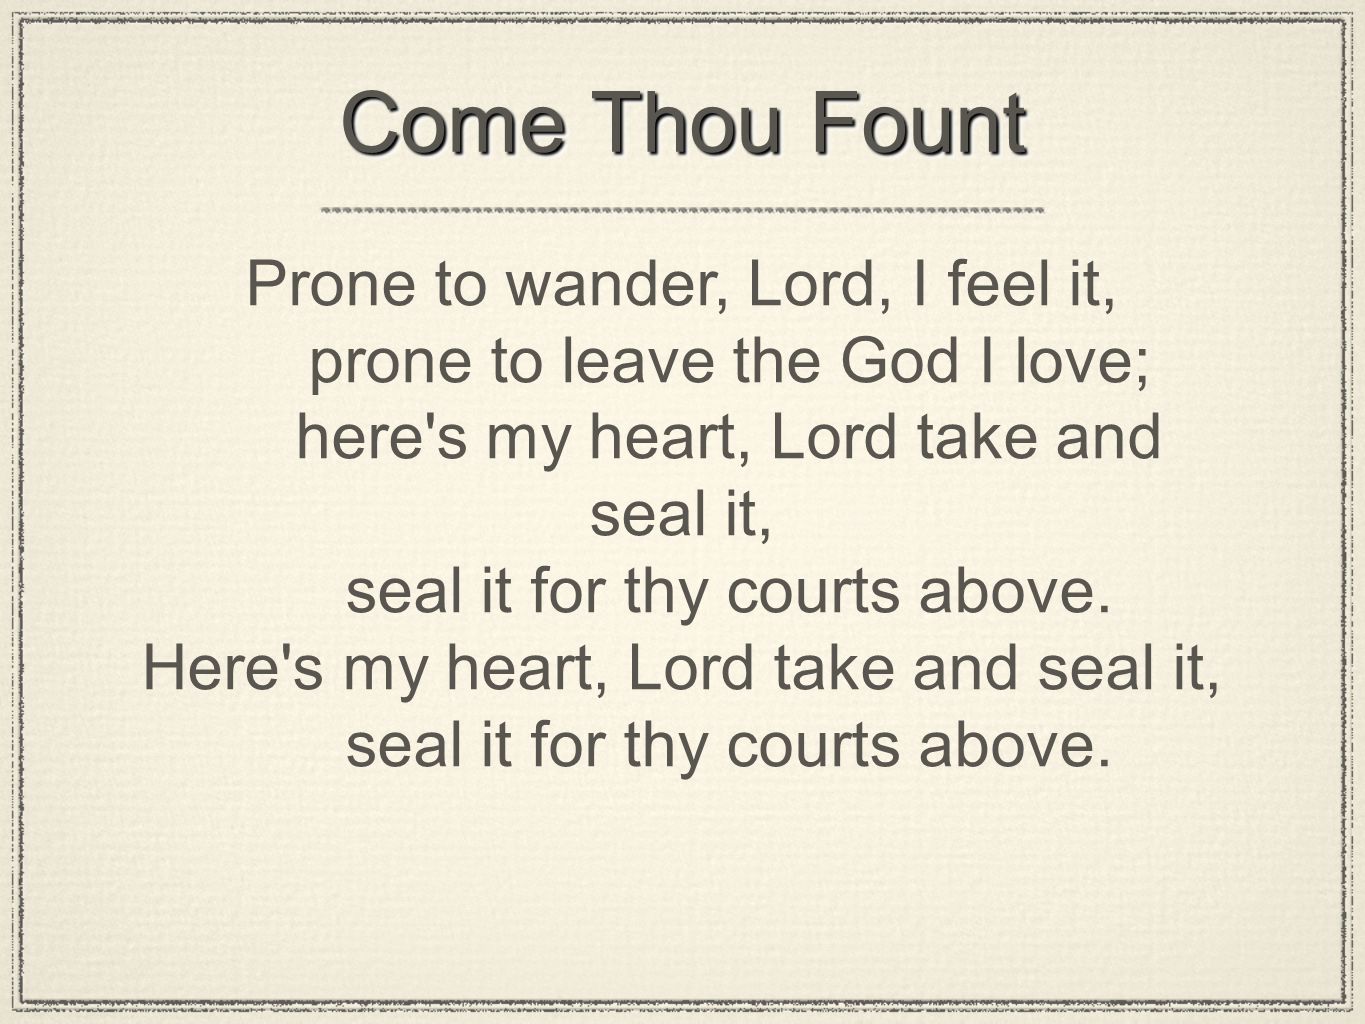 Come Thou Fount Prone to wander, Lord, I feel it, prone to leave the God I love; here s my heart, Lord take and seal it, seal it for thy courts above.